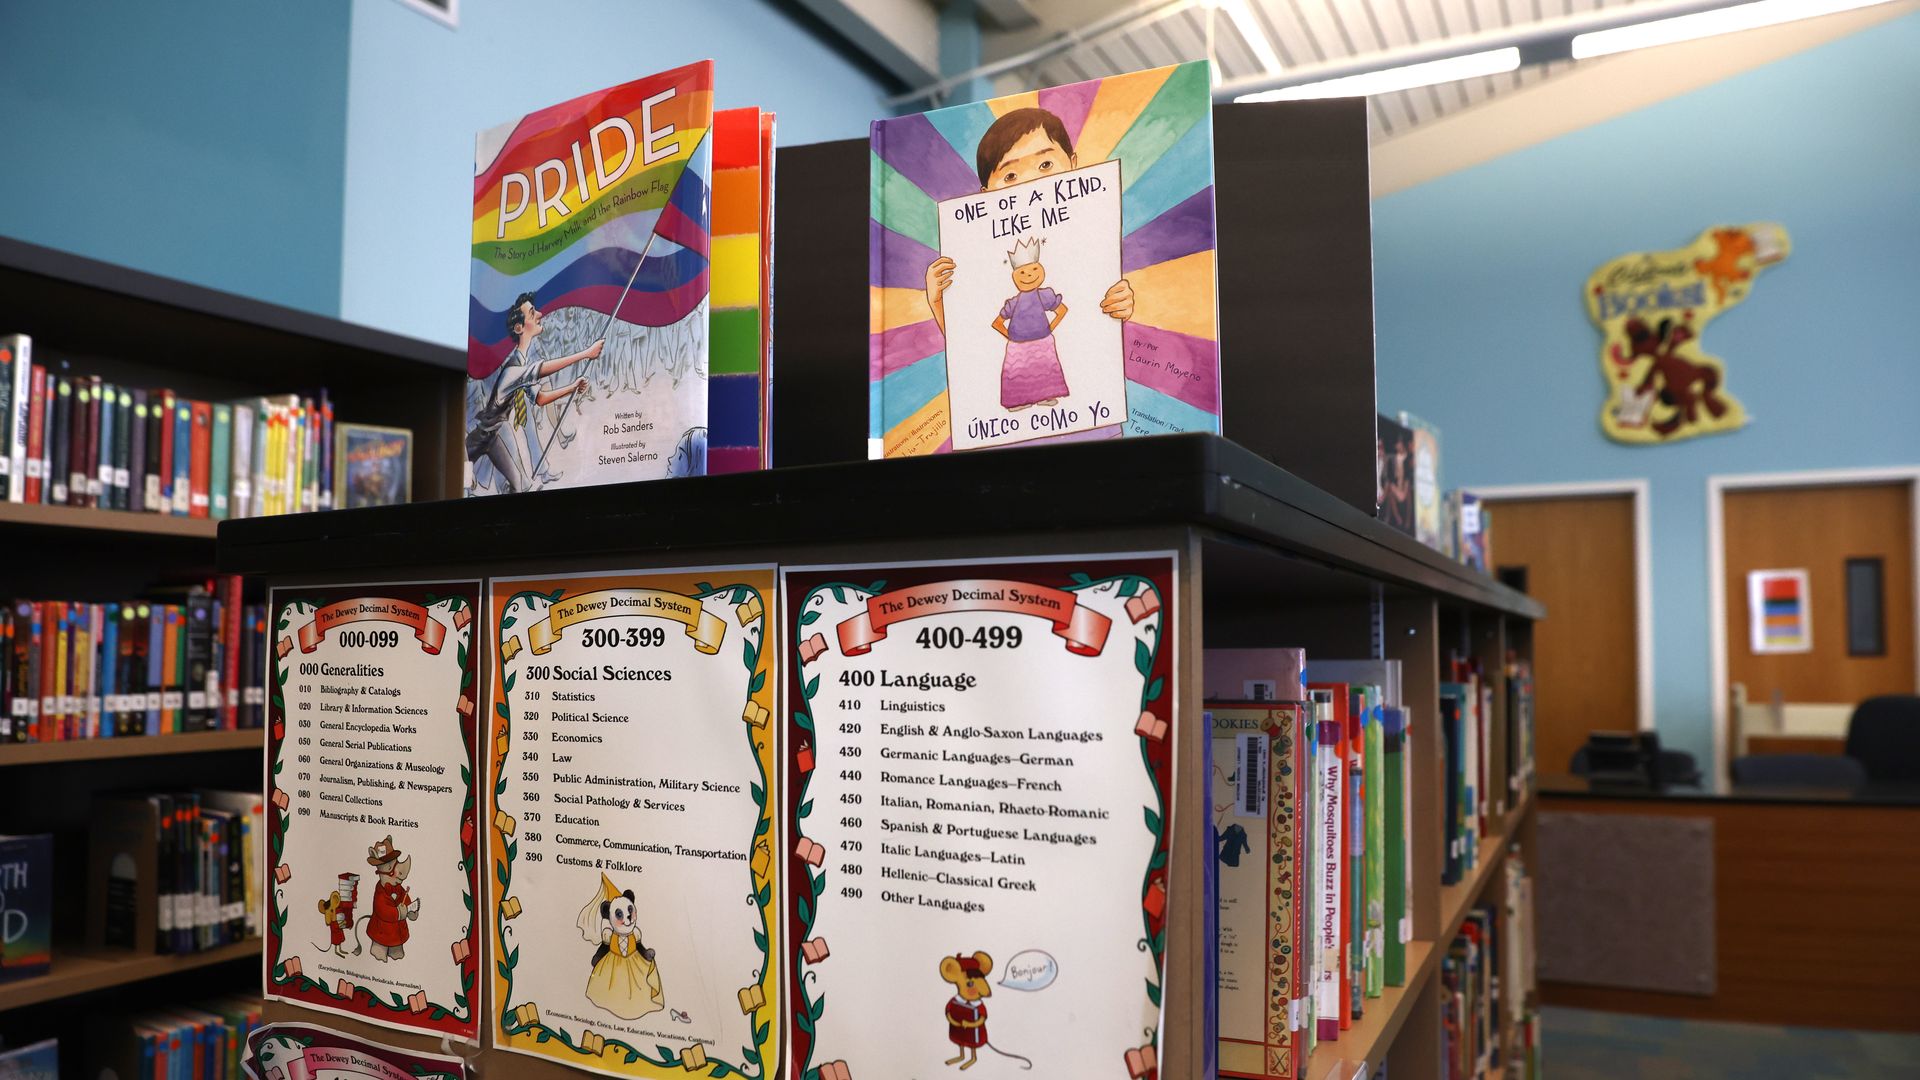 ewly donated LGBTQ+ books are displayed in the library.